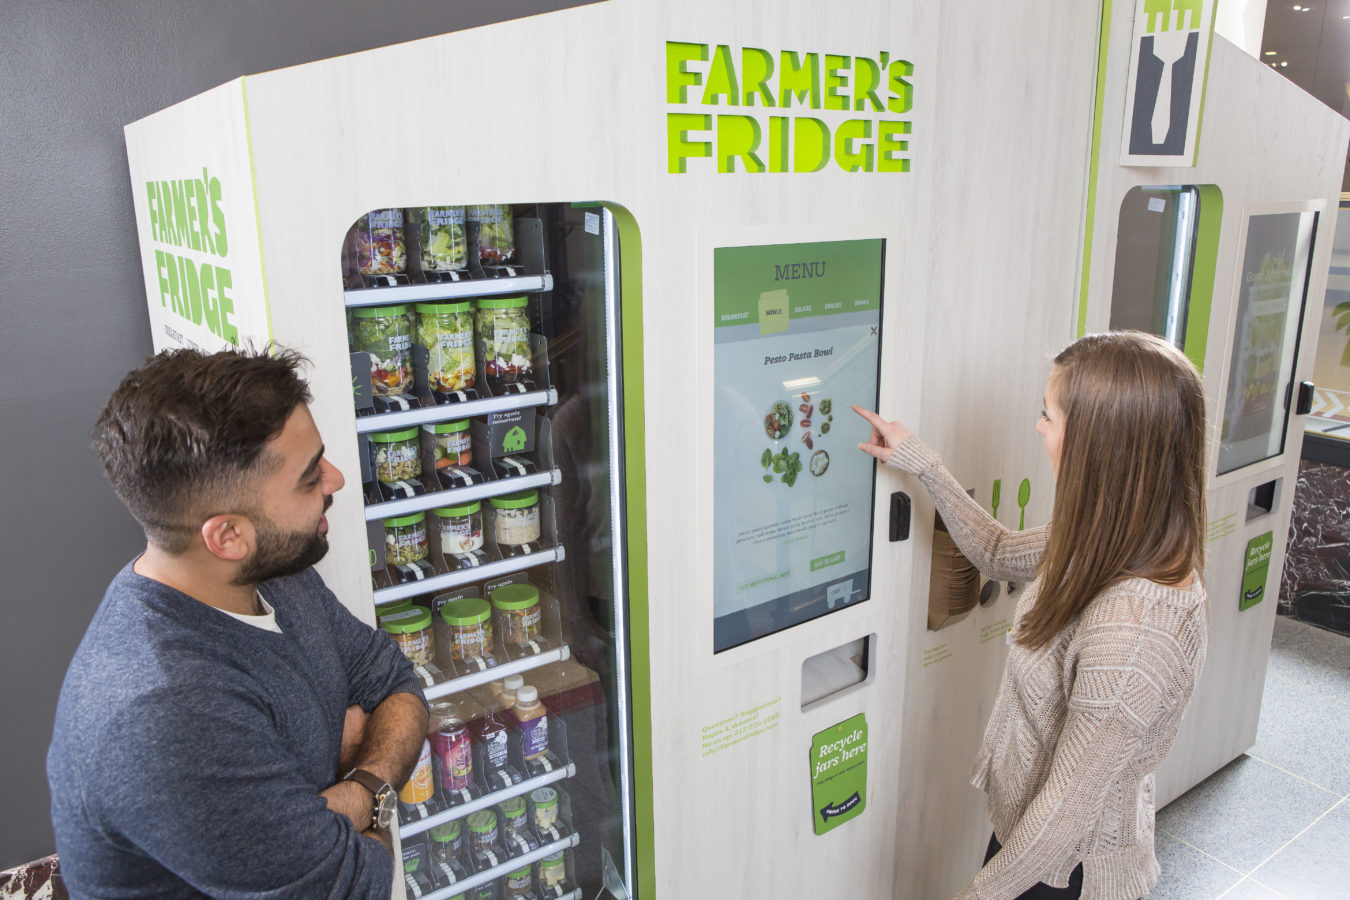 Image of people buying food from the Farmer's Fridge machine